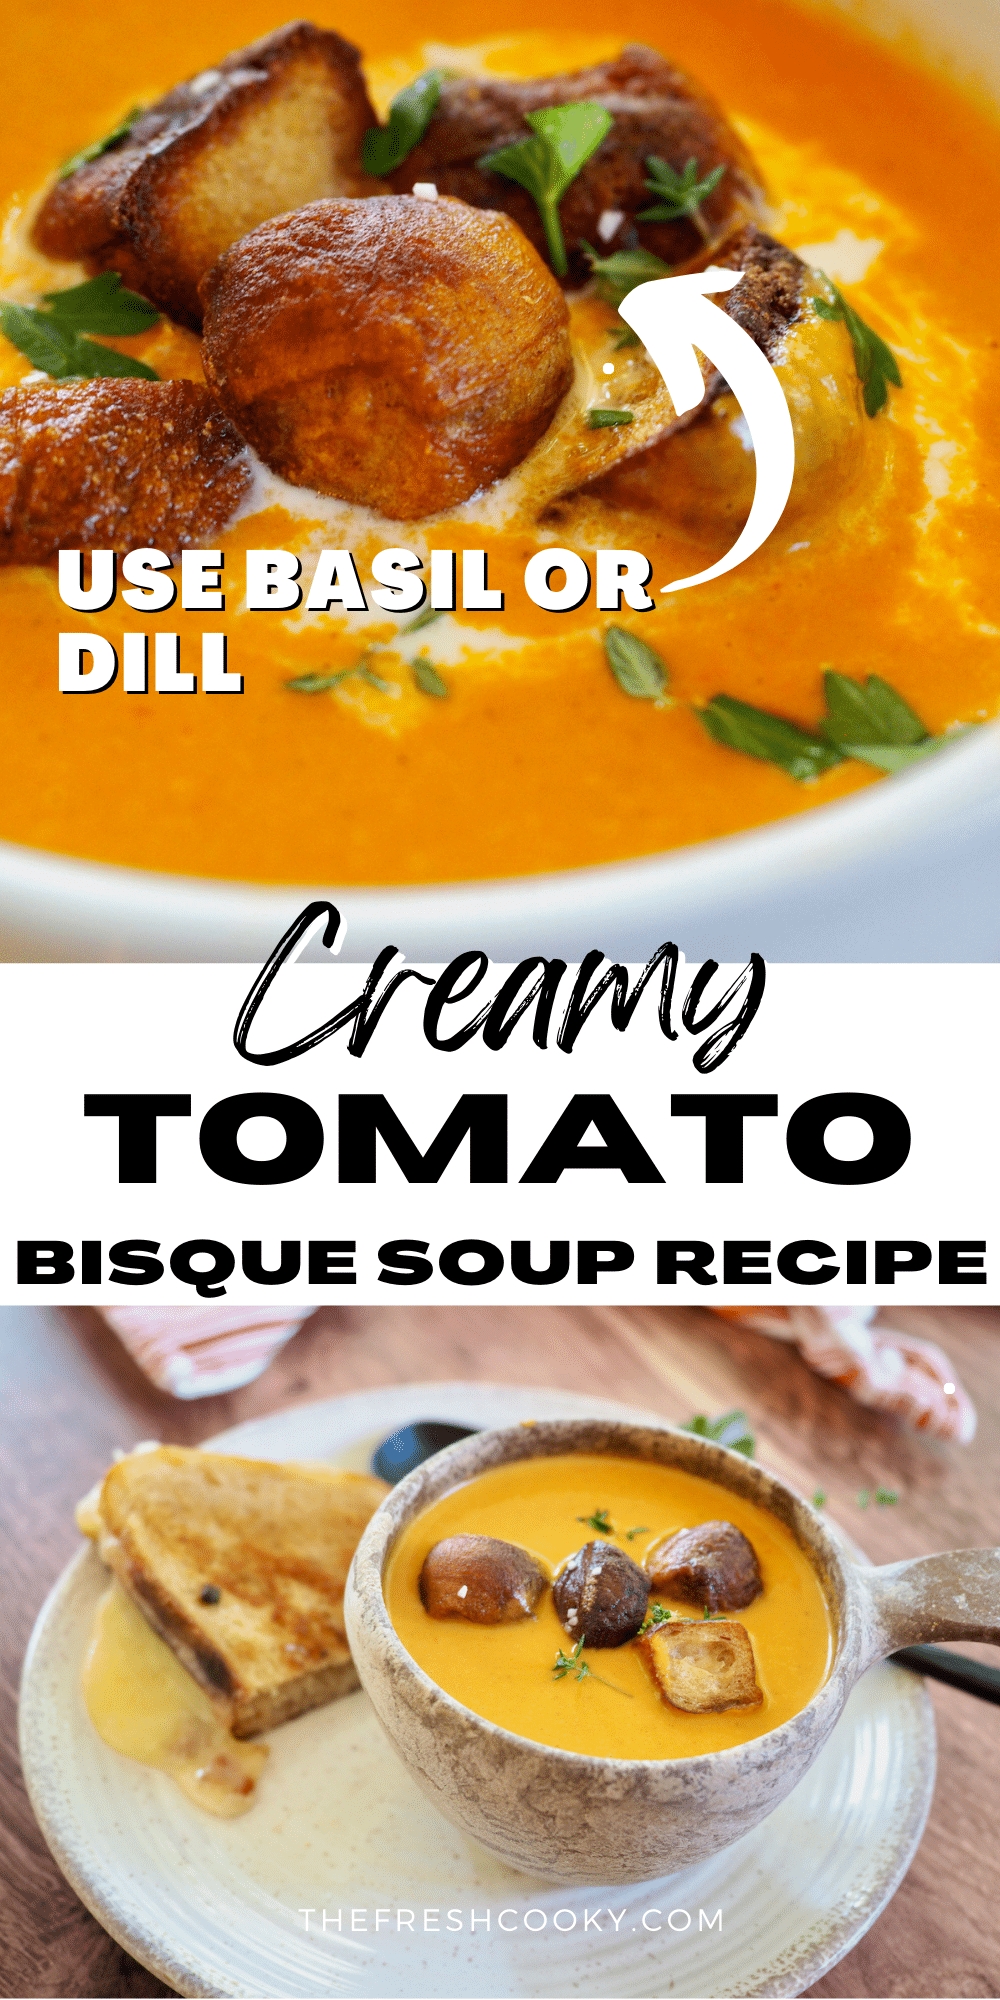 Pin for creamy tomato bisque soup with top image a close up of silky tomato bisque and bottom image of soup in a rustic bowl with a half of a grilled cheese sandwich.